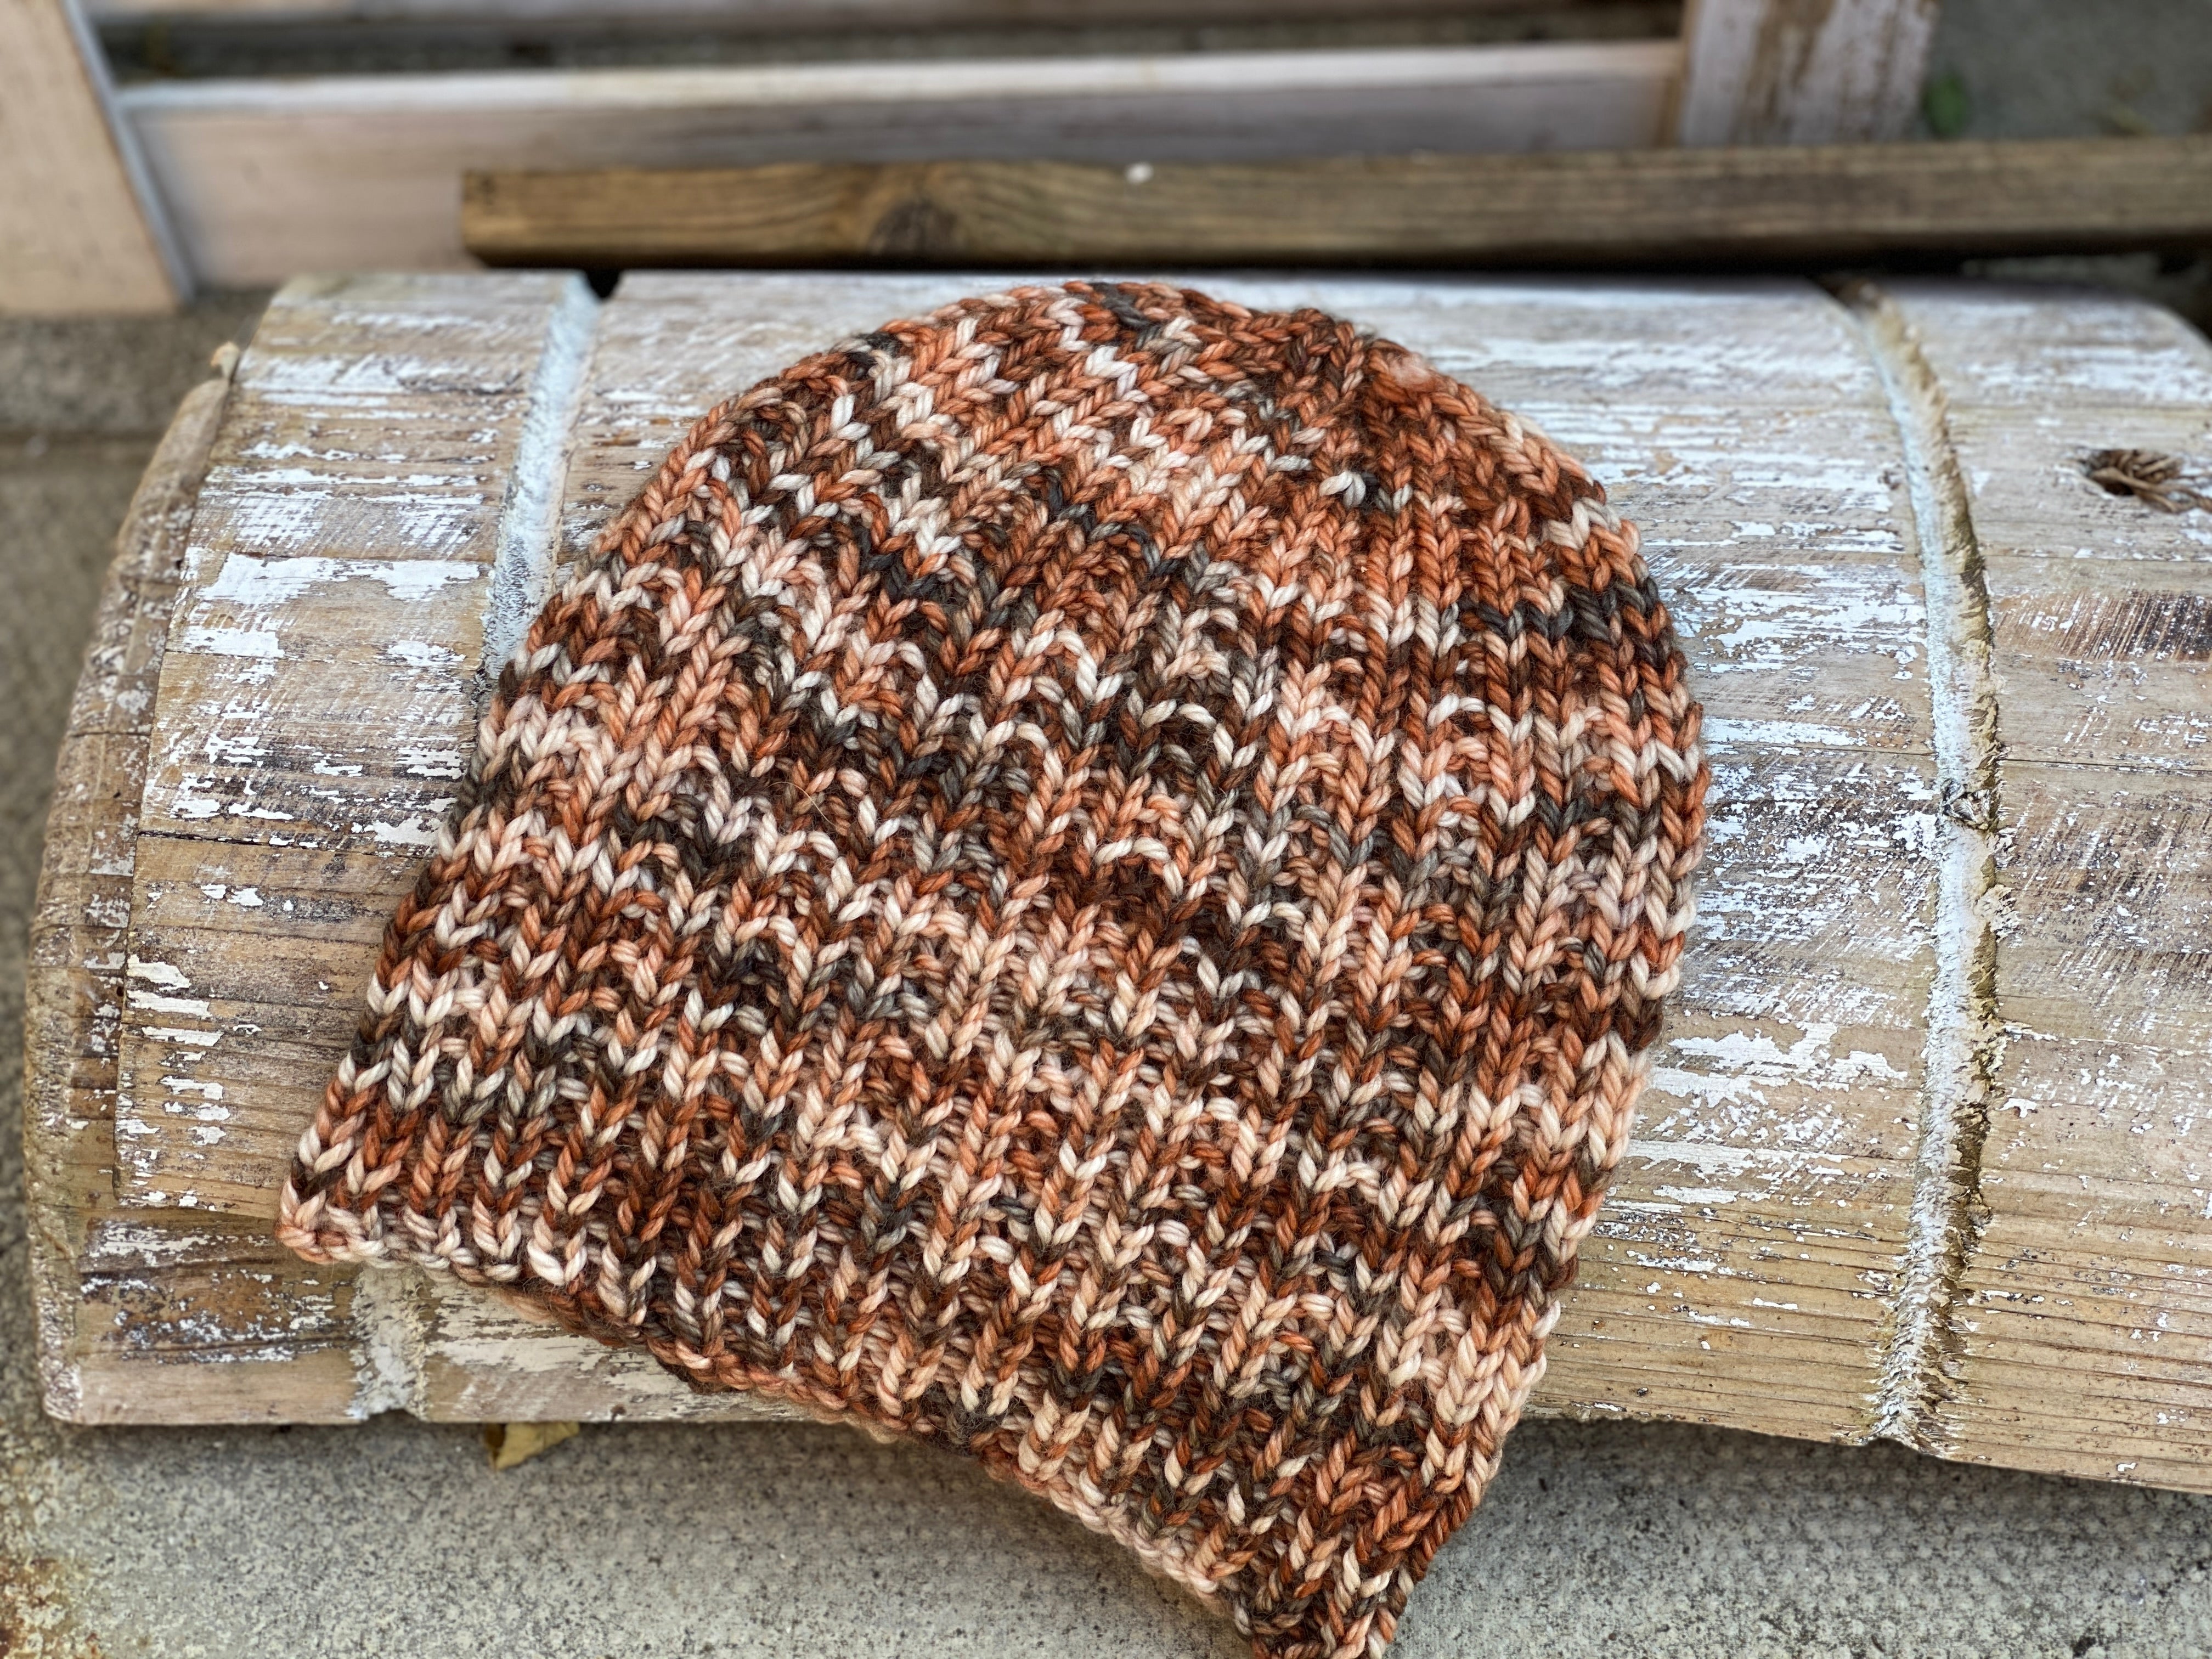 A knitted hat in shades of brown and cream resting on a wooden surface